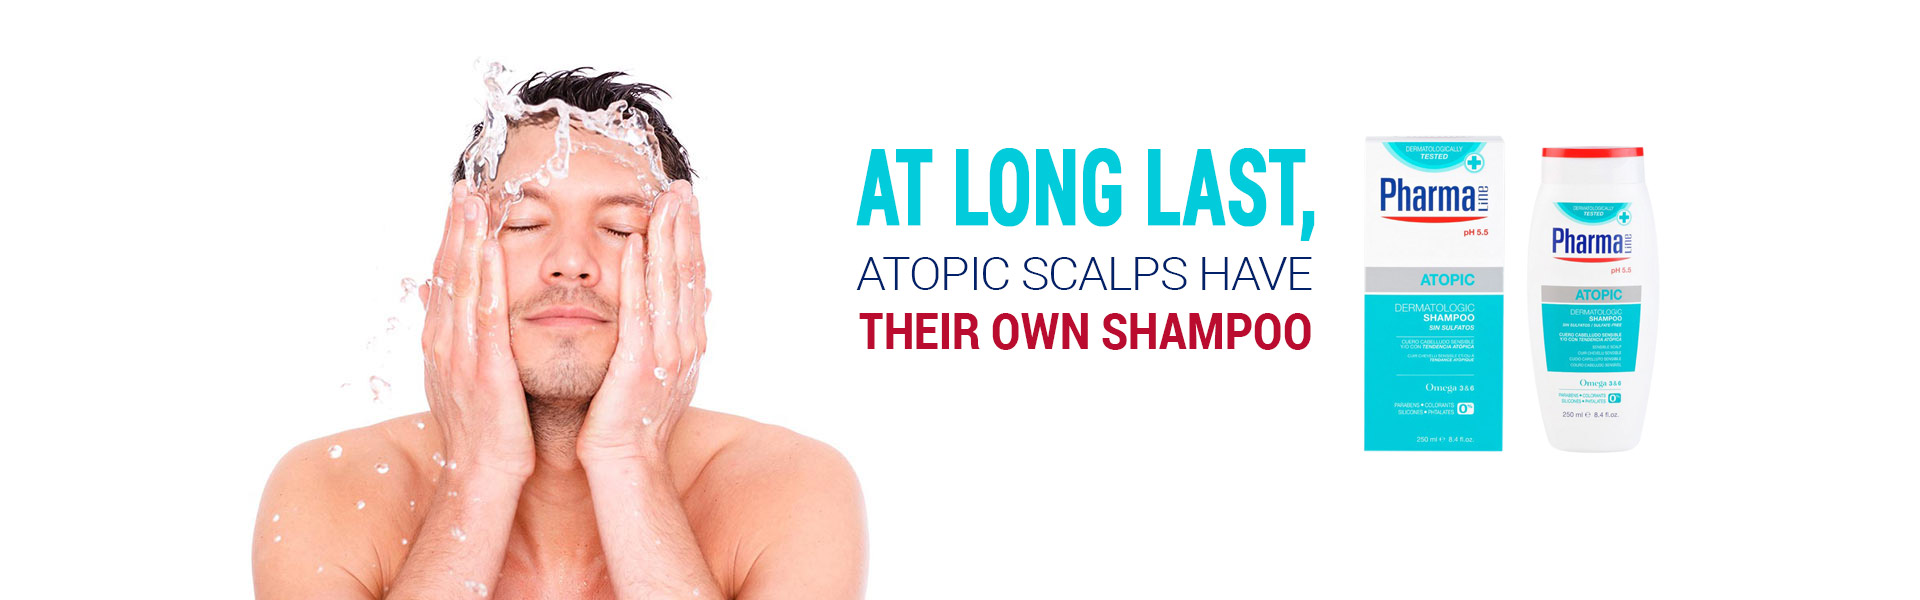 Atopic Skin Shampoos Soaps And Creams For Atopic Dermatitis 1473